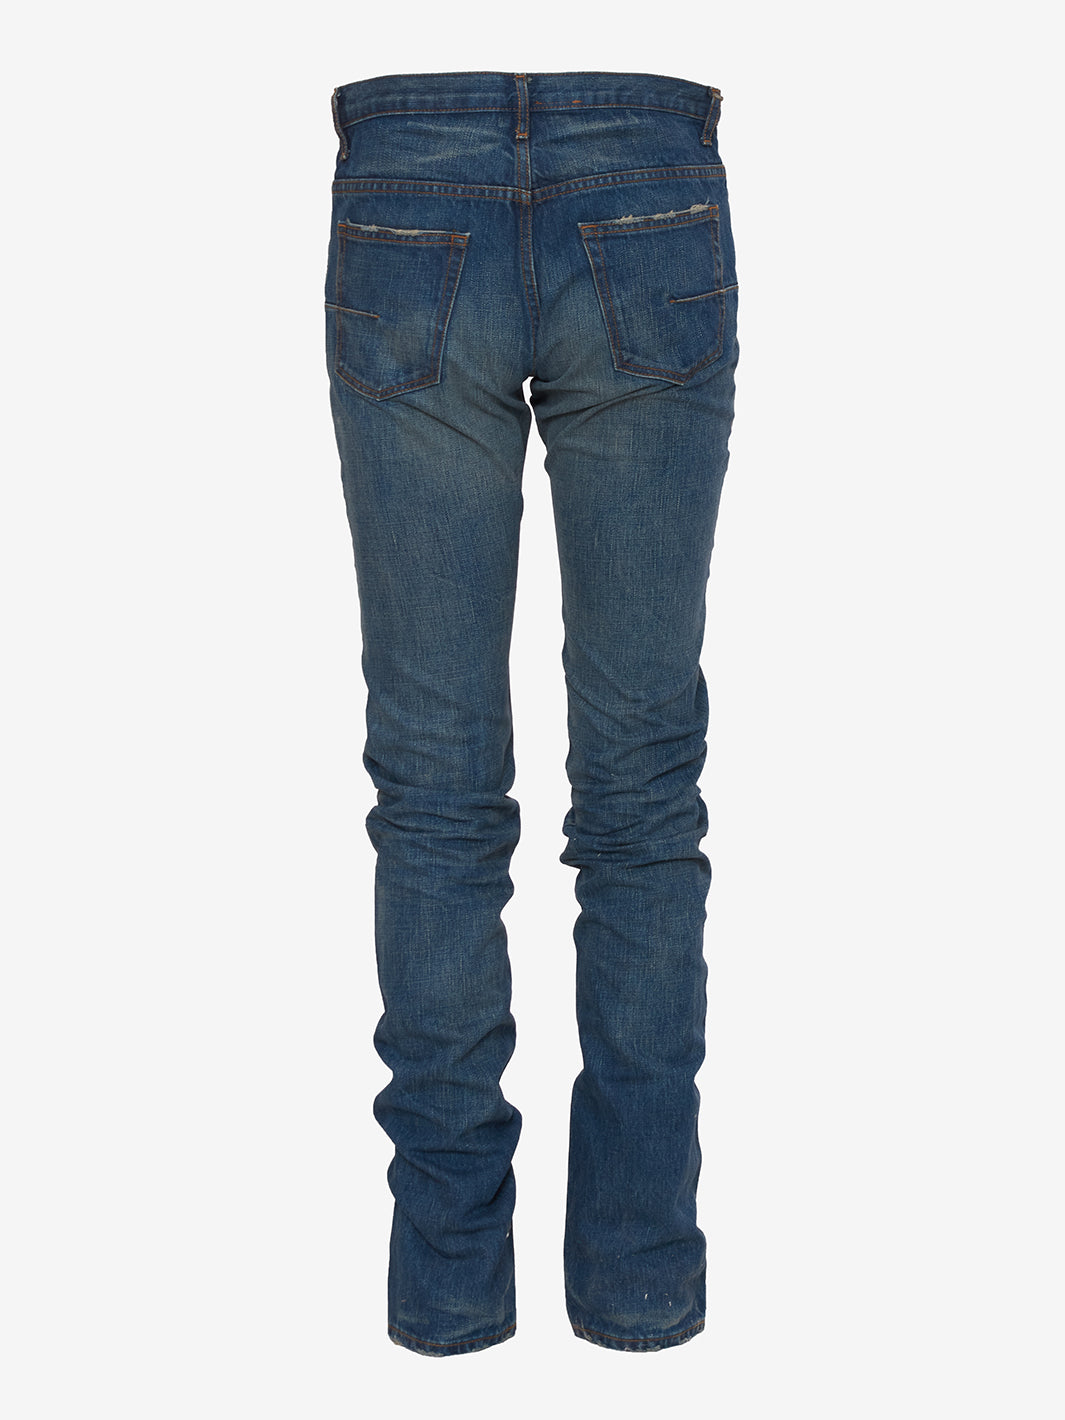 Dior Jeans in Blue Cotton